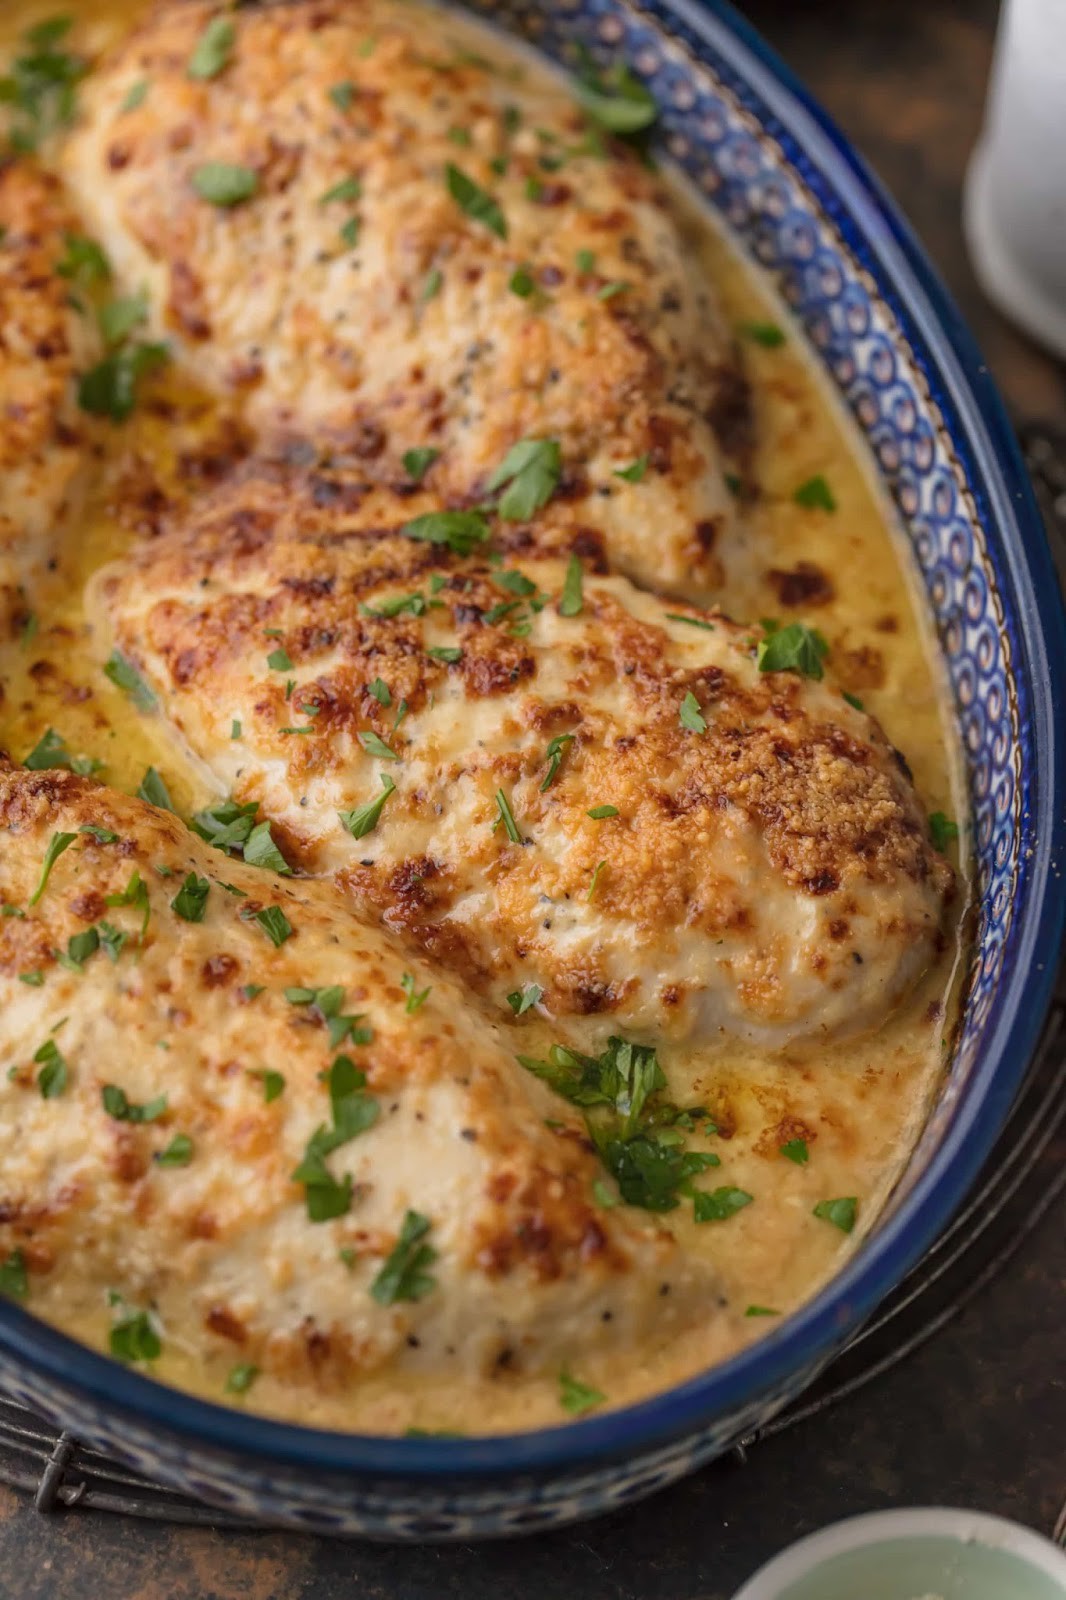 Melt in Your Mouth Oven Baked Chicken | Pamela Estepp | Copy Me That